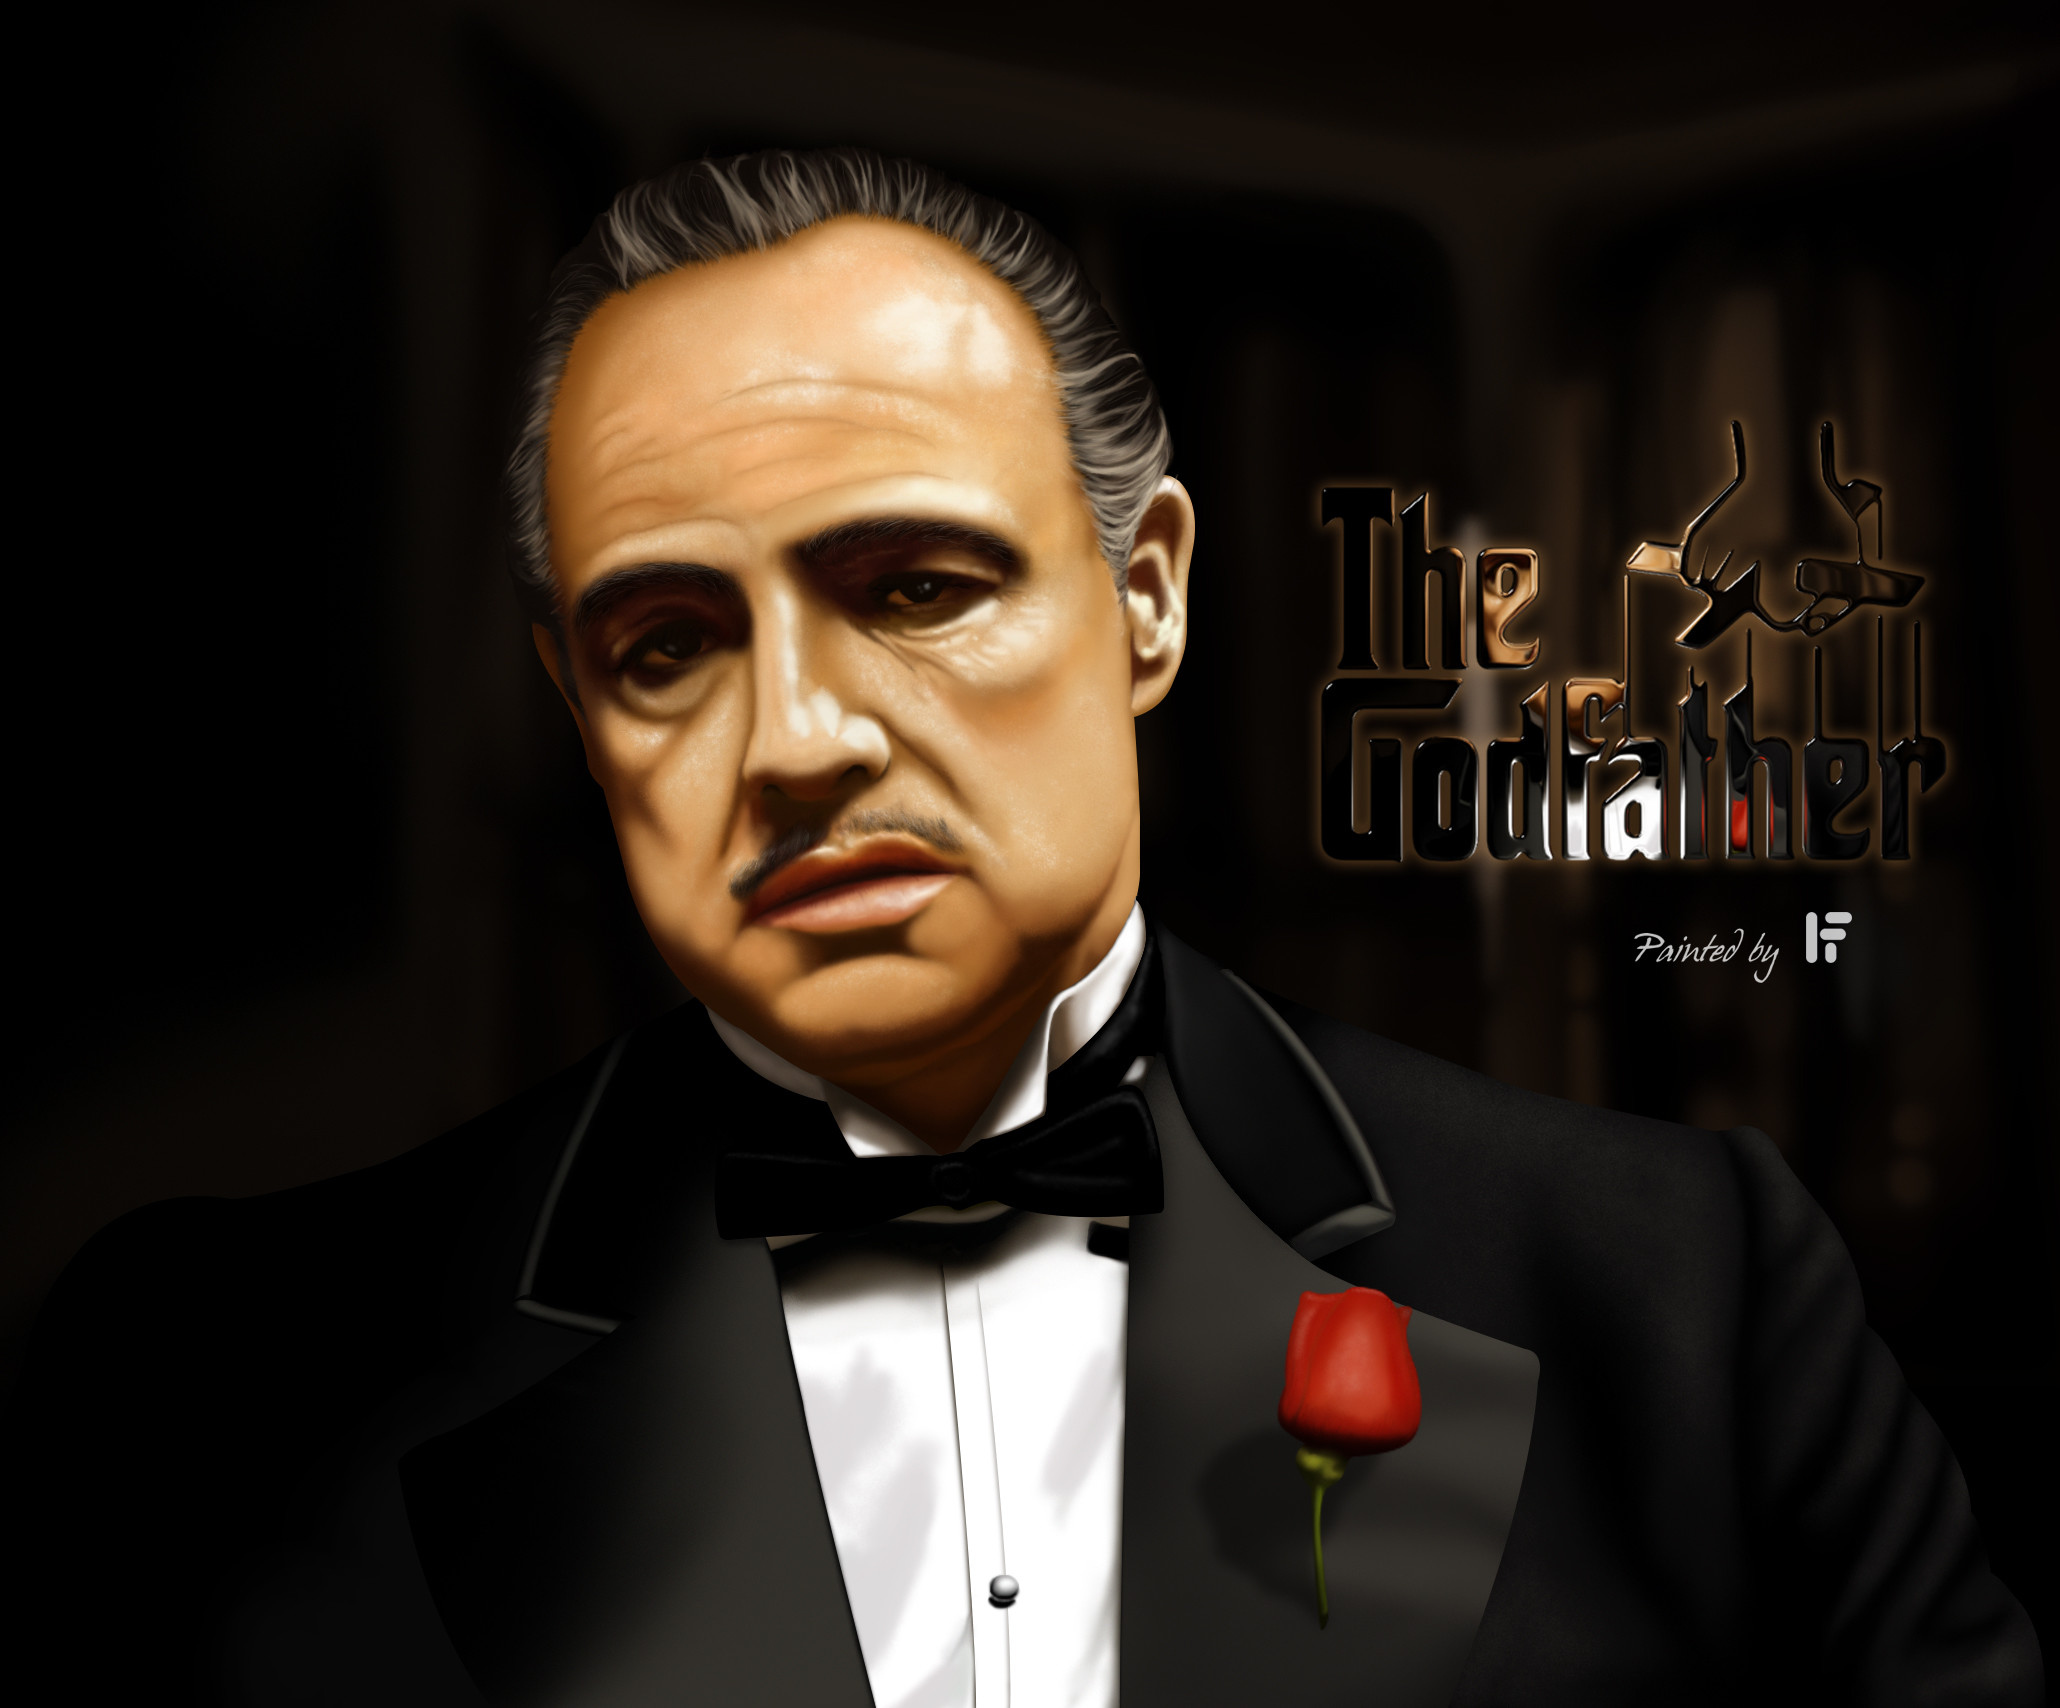 The Godfather Wallpaper 64 Images 2658